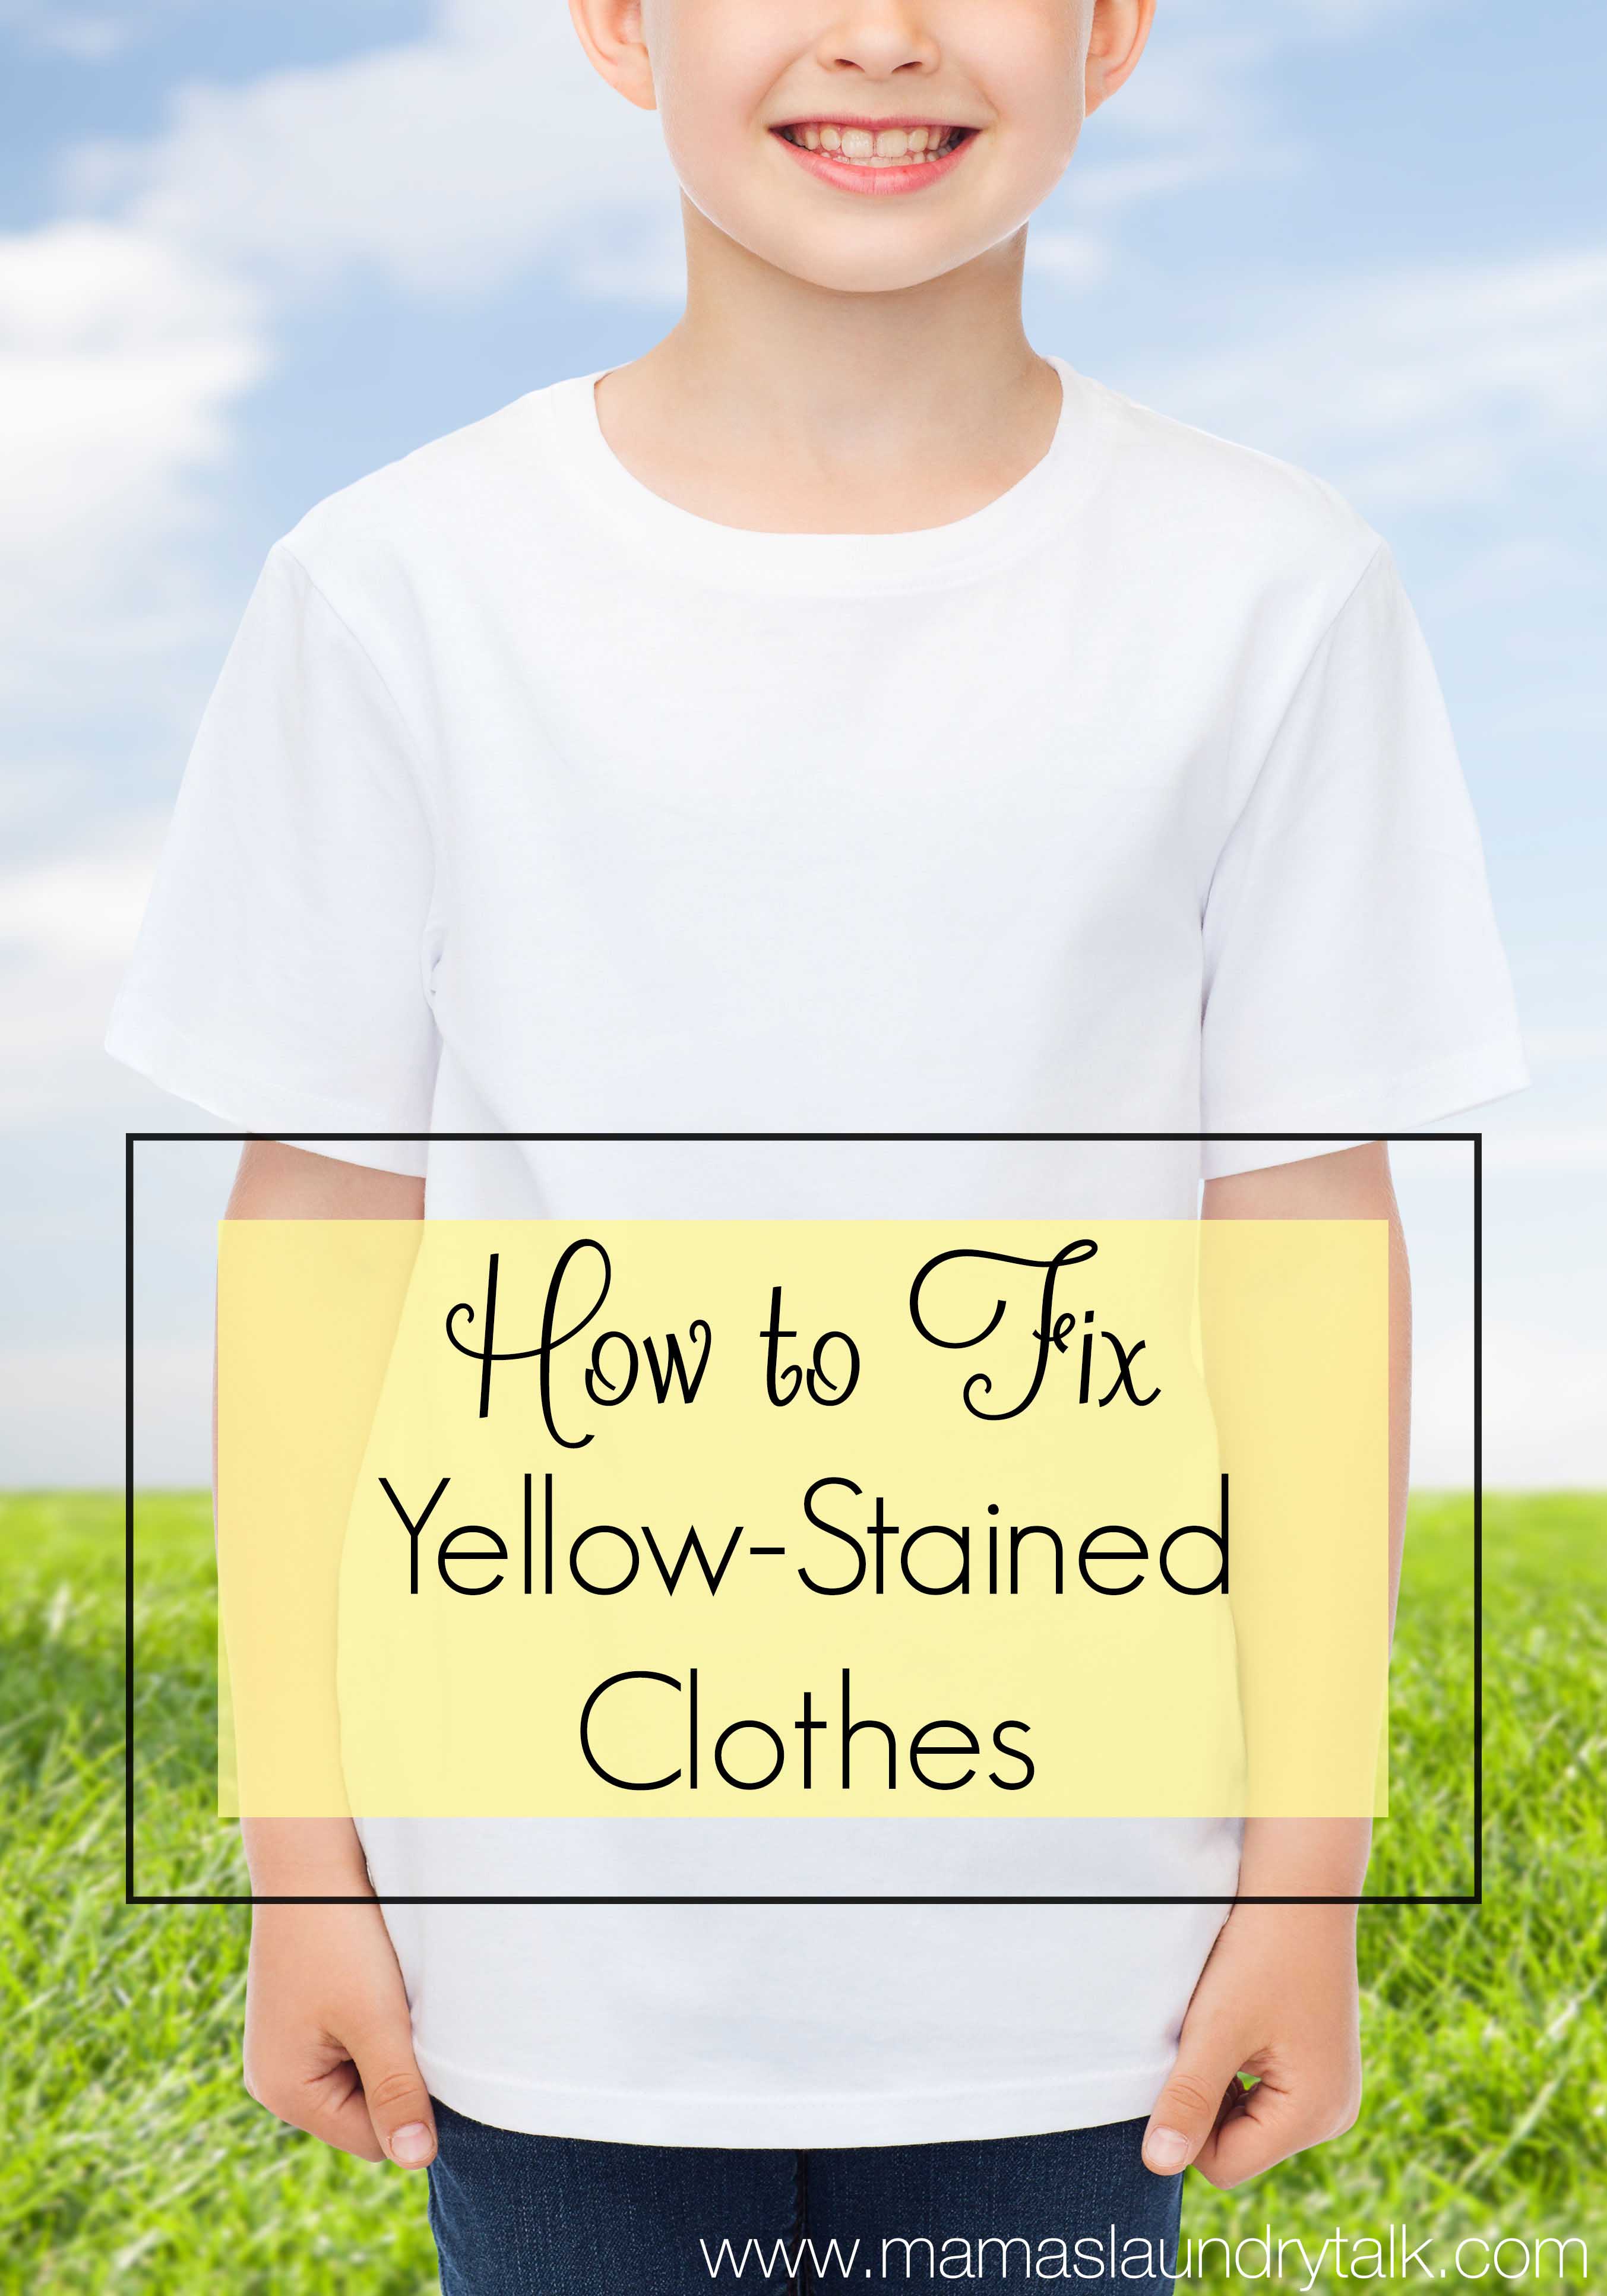 how to get yellow bleach stains out of clothes